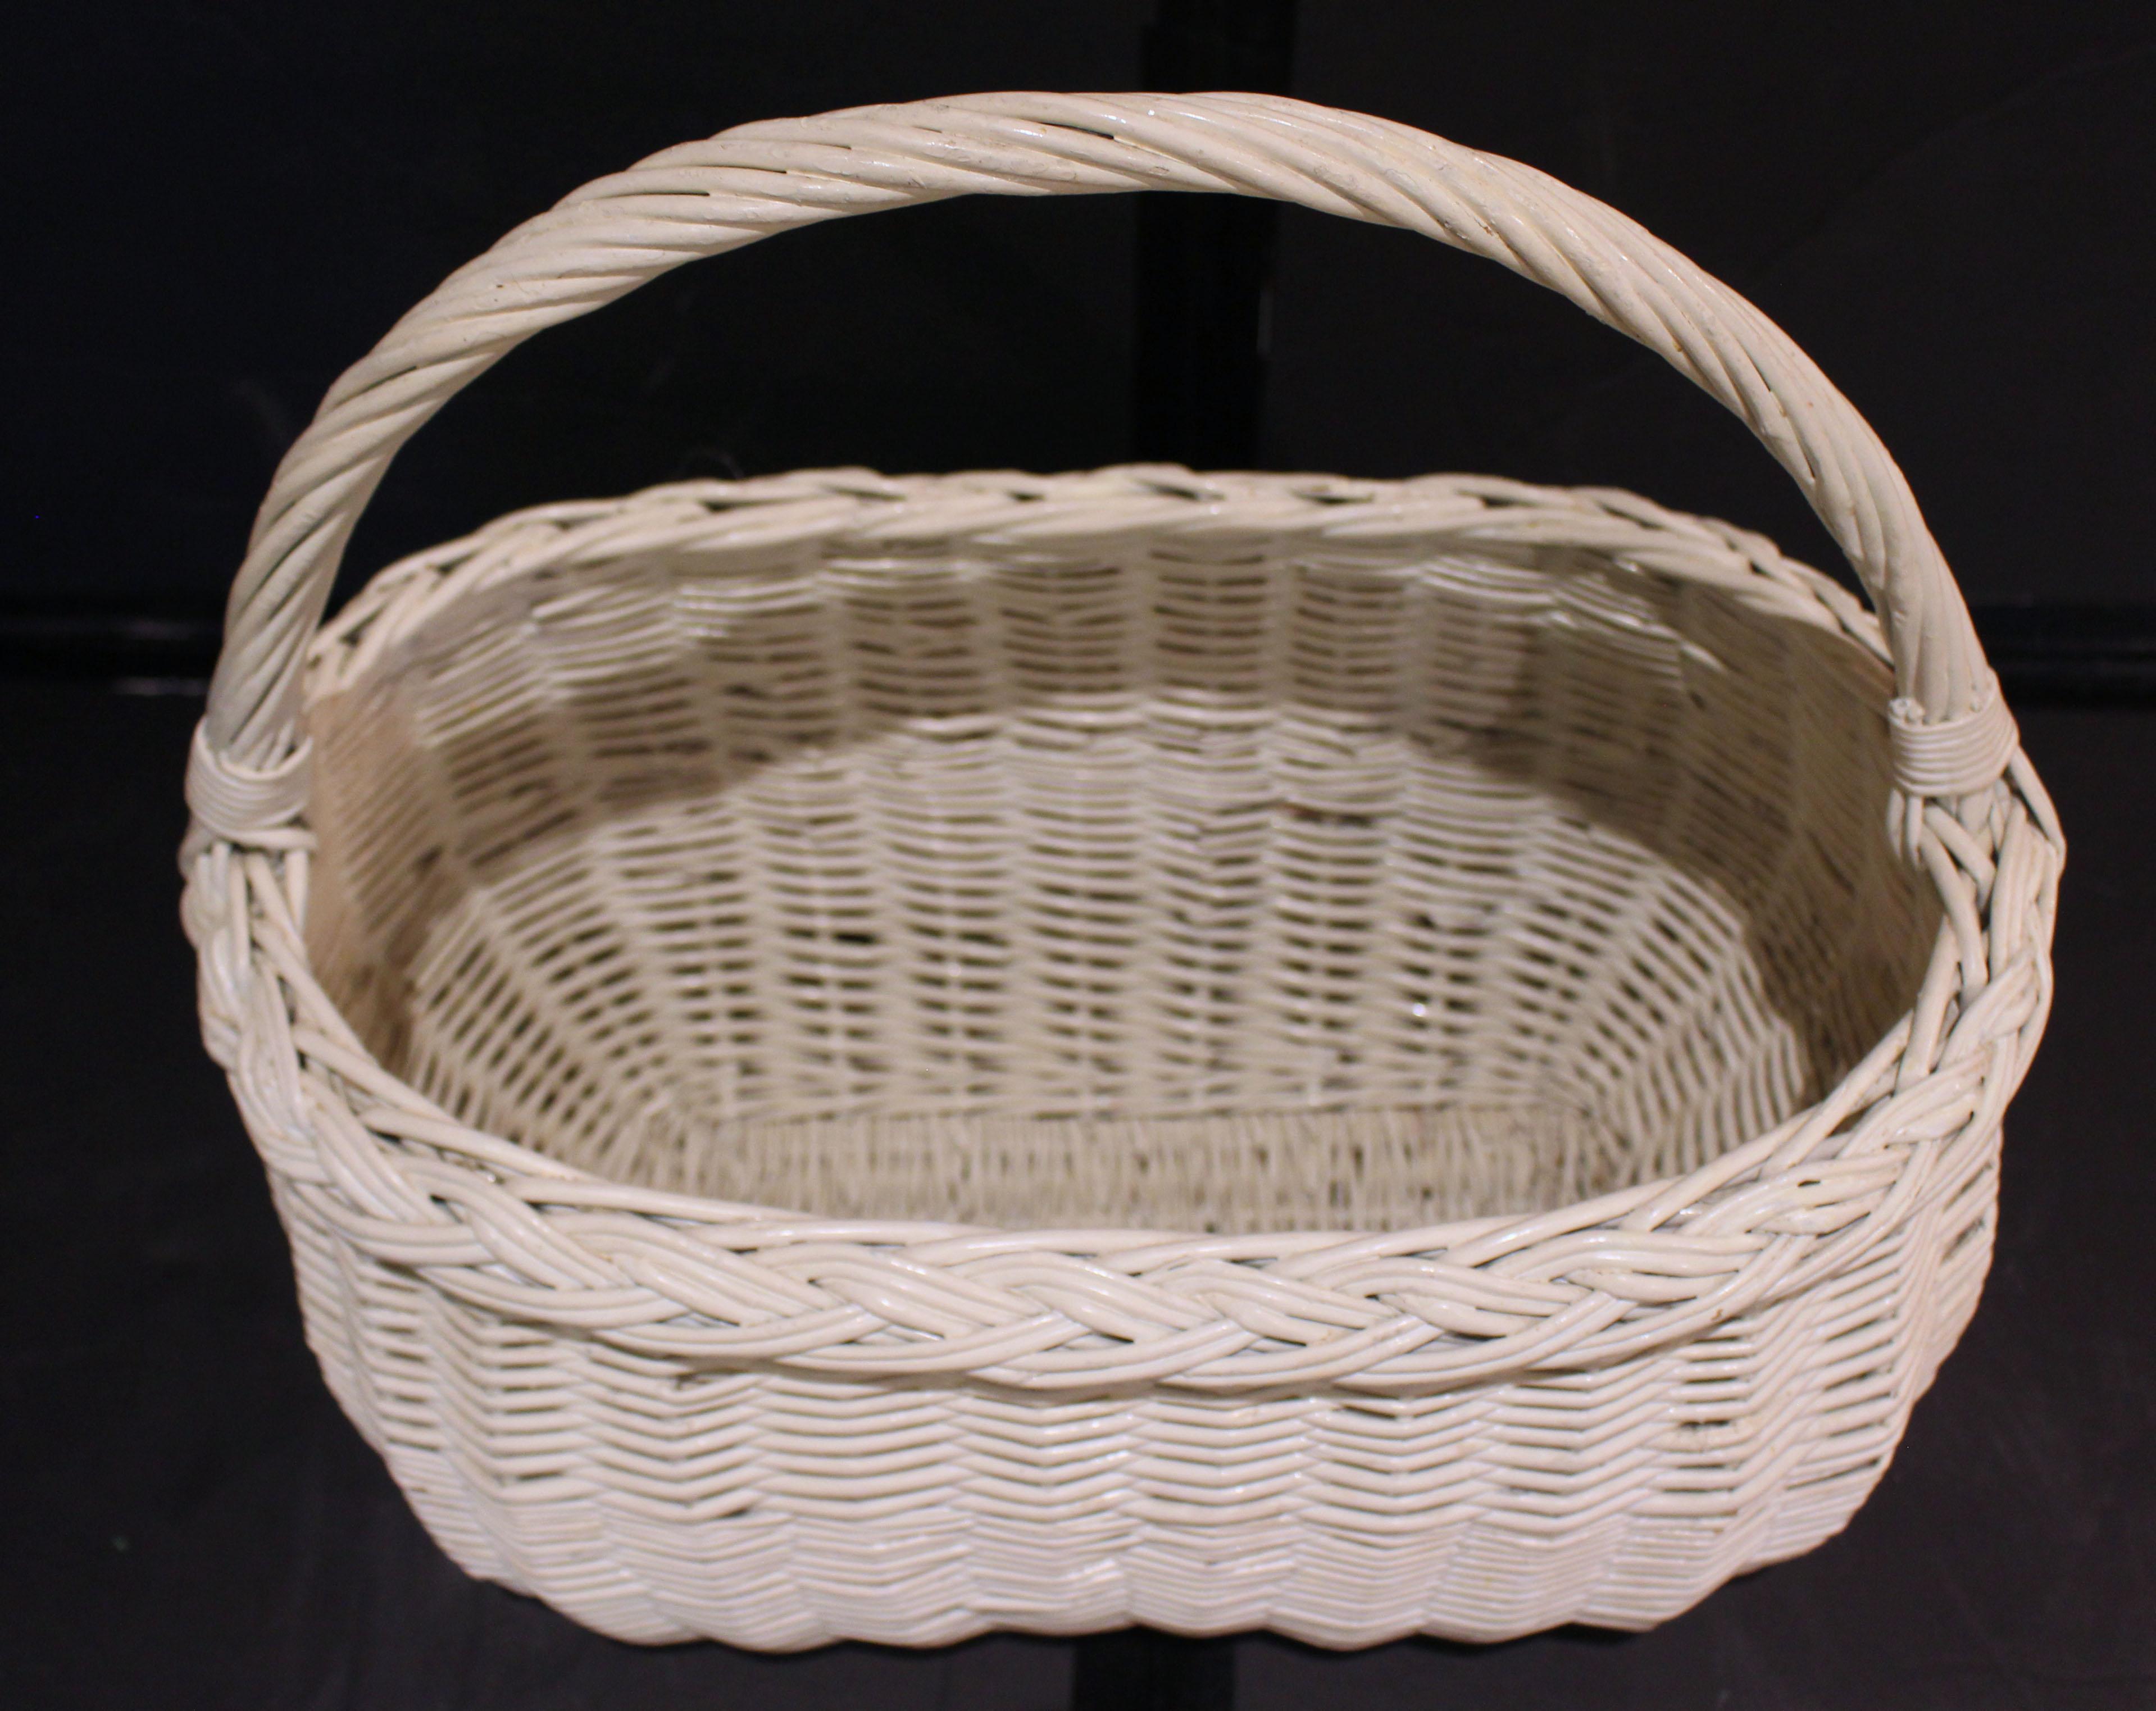 Early 20th century wicker handled basket, New England. Woven wicker market basket with twisted integral handle - ideal for many uses! Repainted in cream color.
18